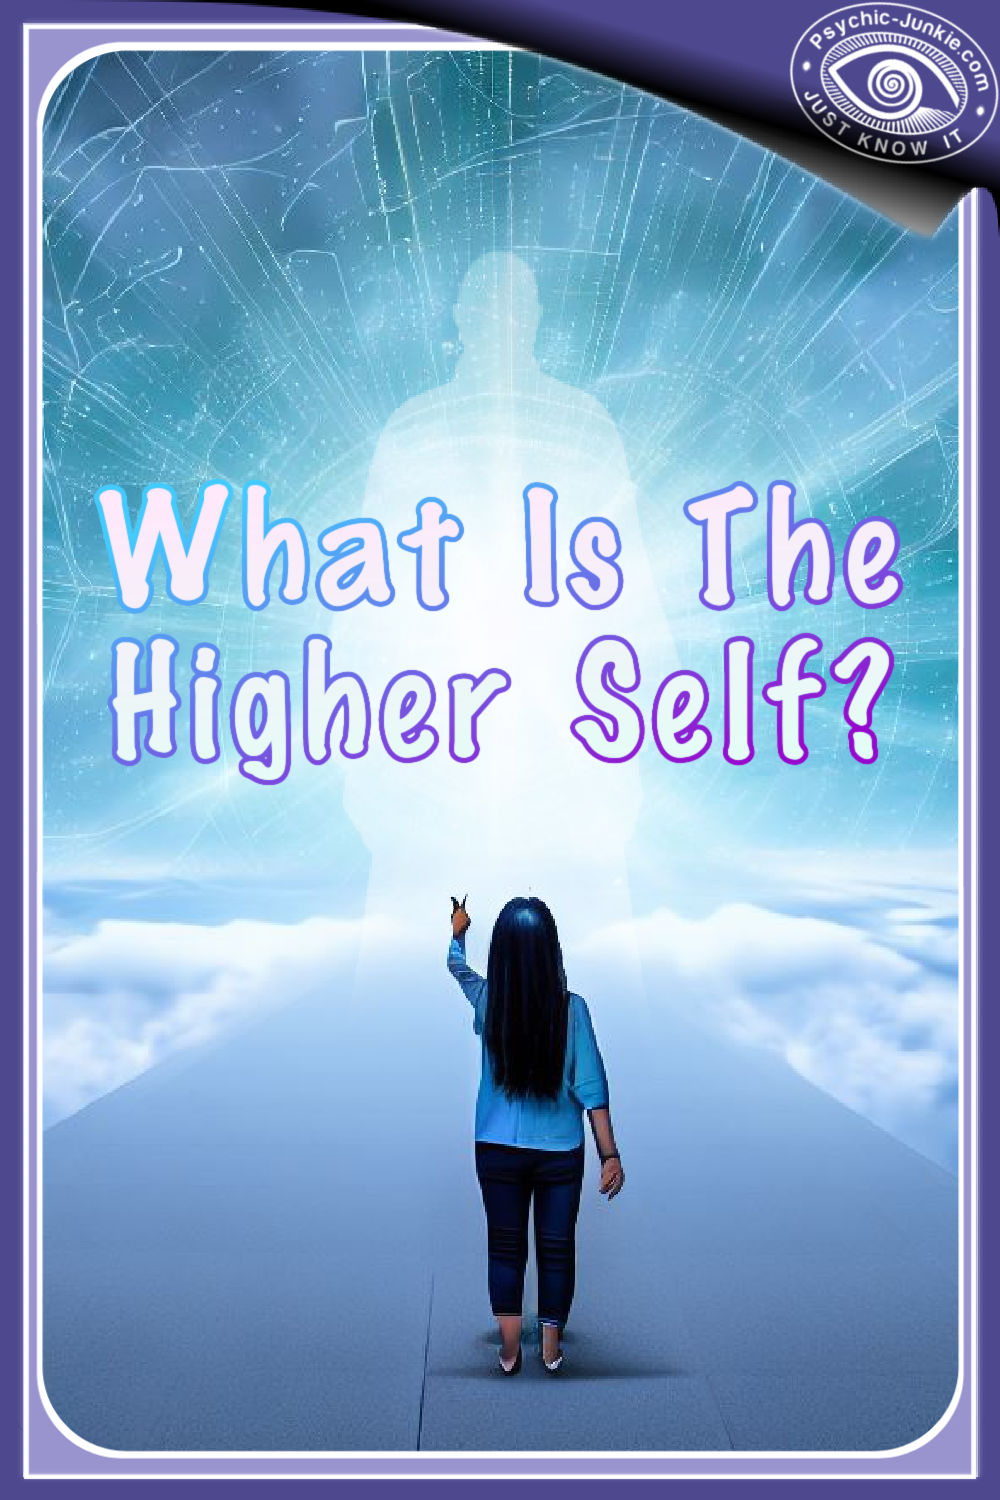 What is the Higher Self?